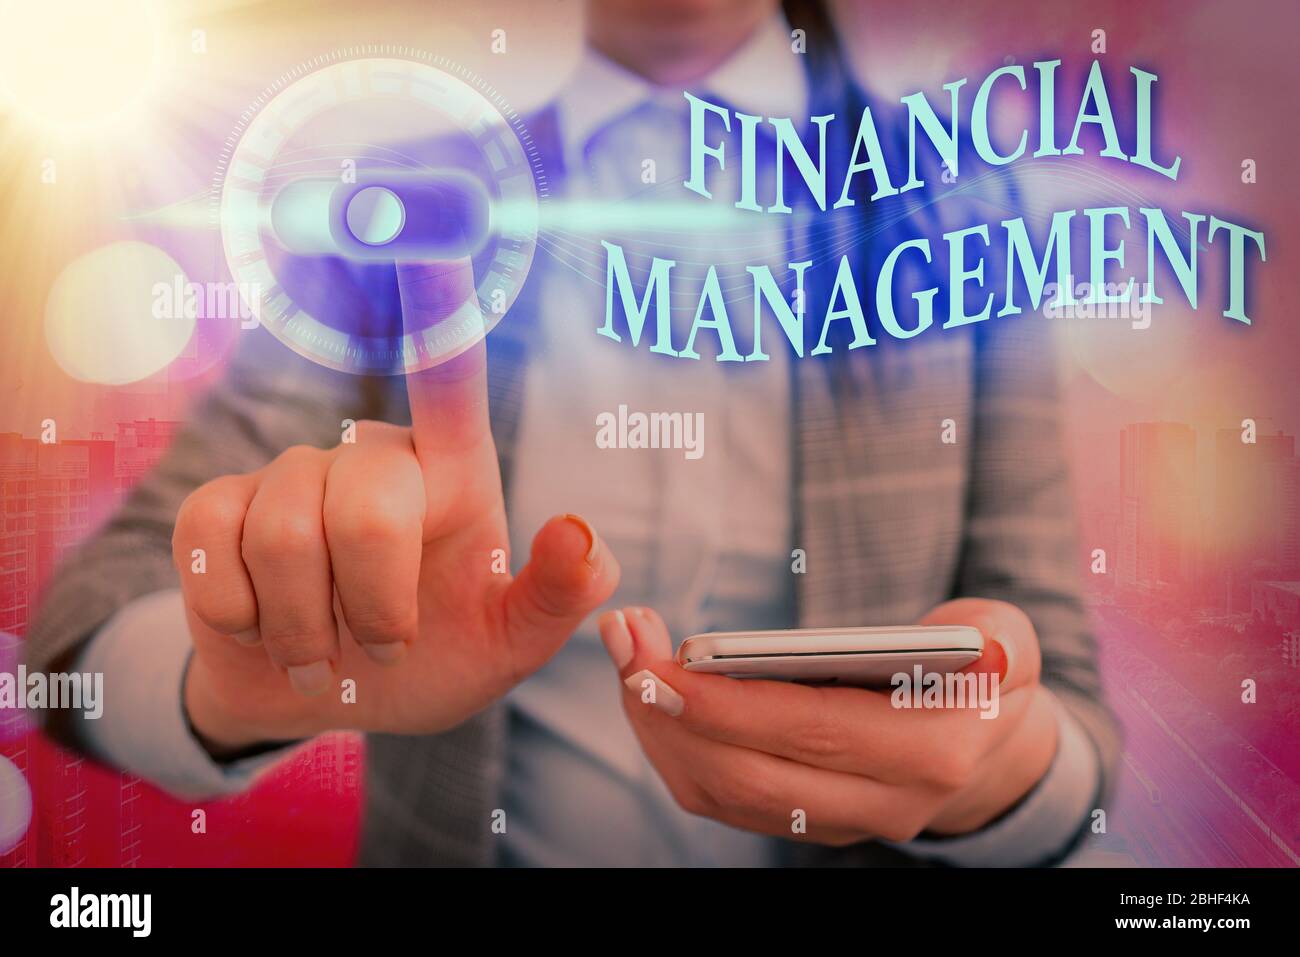 Writing note showing Financial Management. Business concept for efficient and effective way to Manage Money and Funds Stock Photo